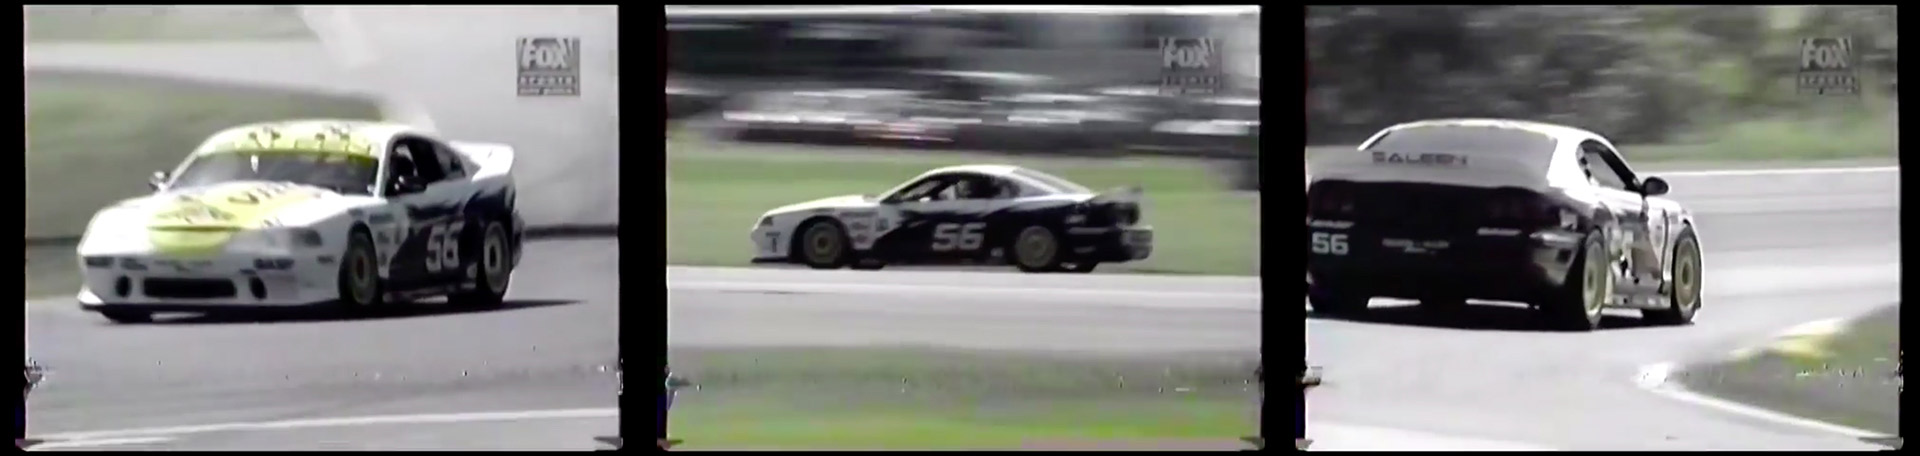 Pictured: screenshots of a contemporary Fox News broadcast of the SCCA race at Lime Rock in 1998. Here we see a Saleen SR Widebody Mustang leading the race, driven by Terry Borcheller and run by Steve Saleen and Tim Allen’s team.